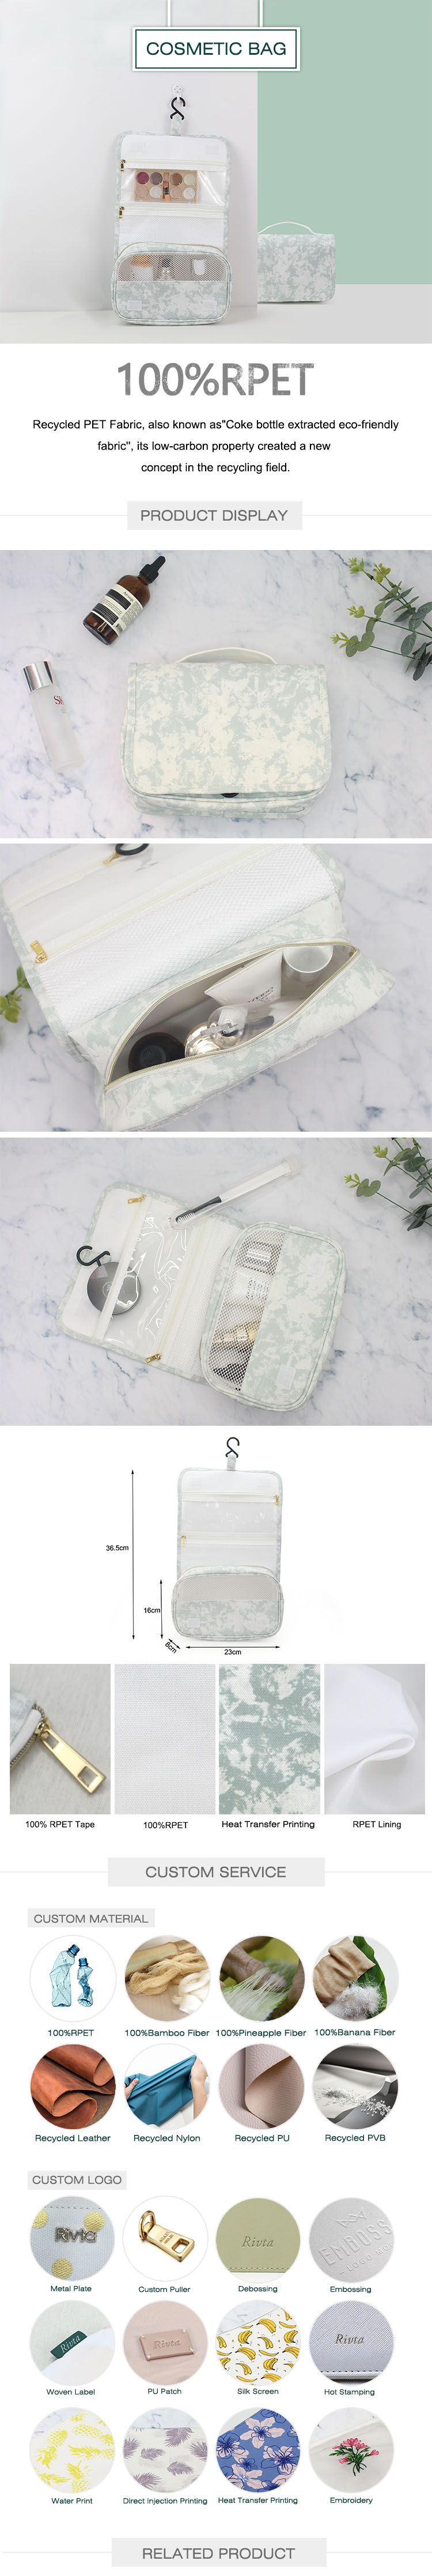 Travel Essential Toilery Bag Recycled PET - TRA037